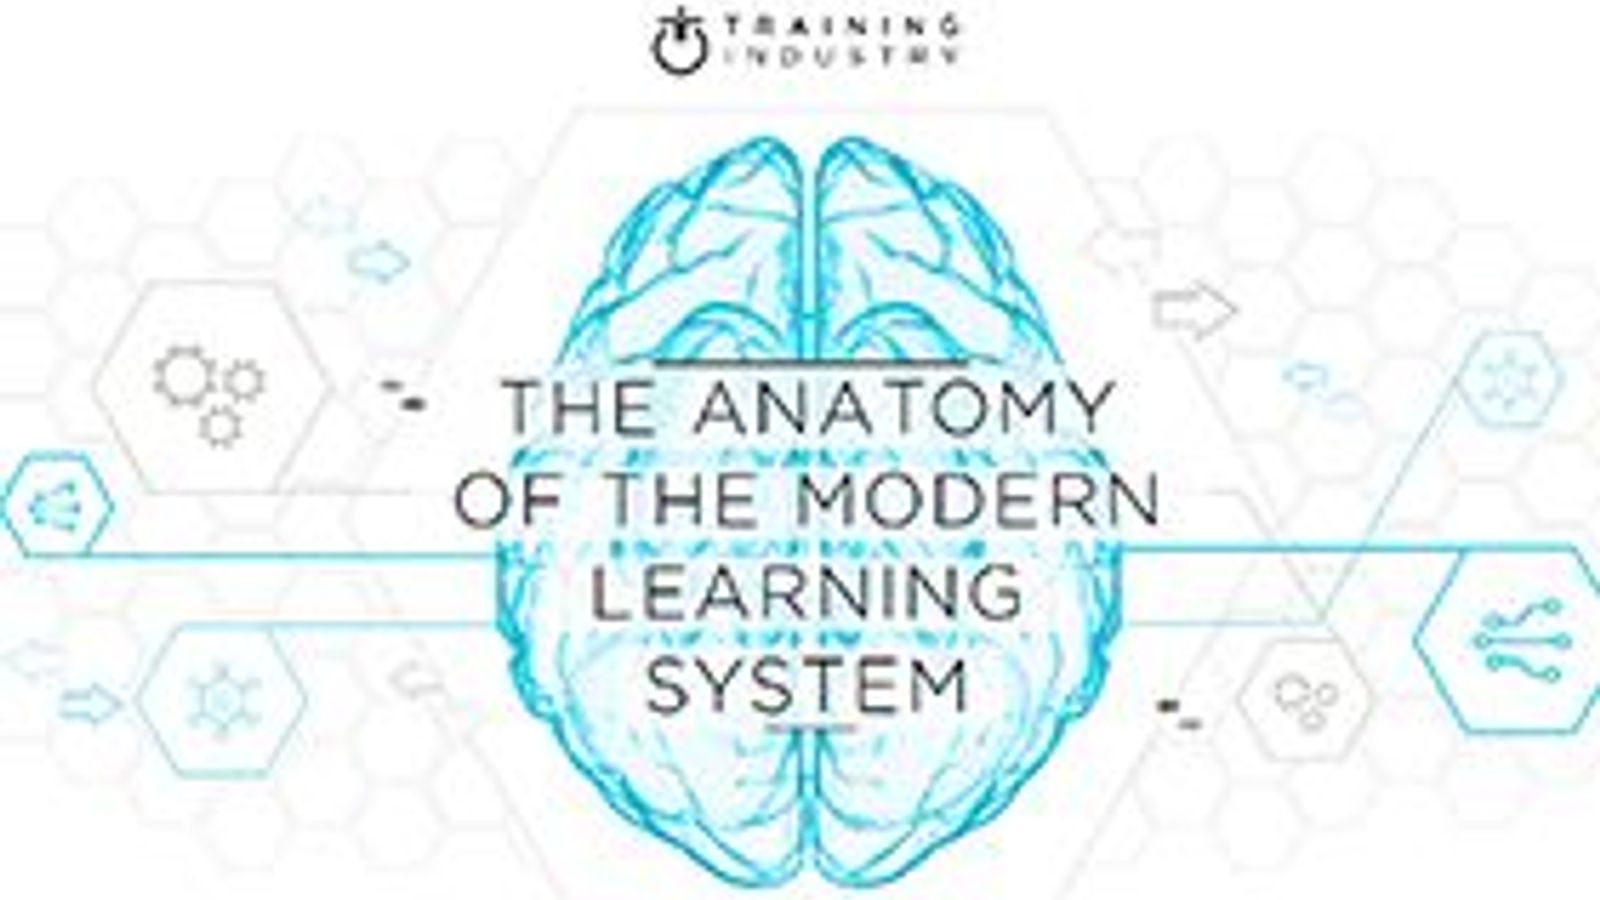 The anatomy of the modern learning system